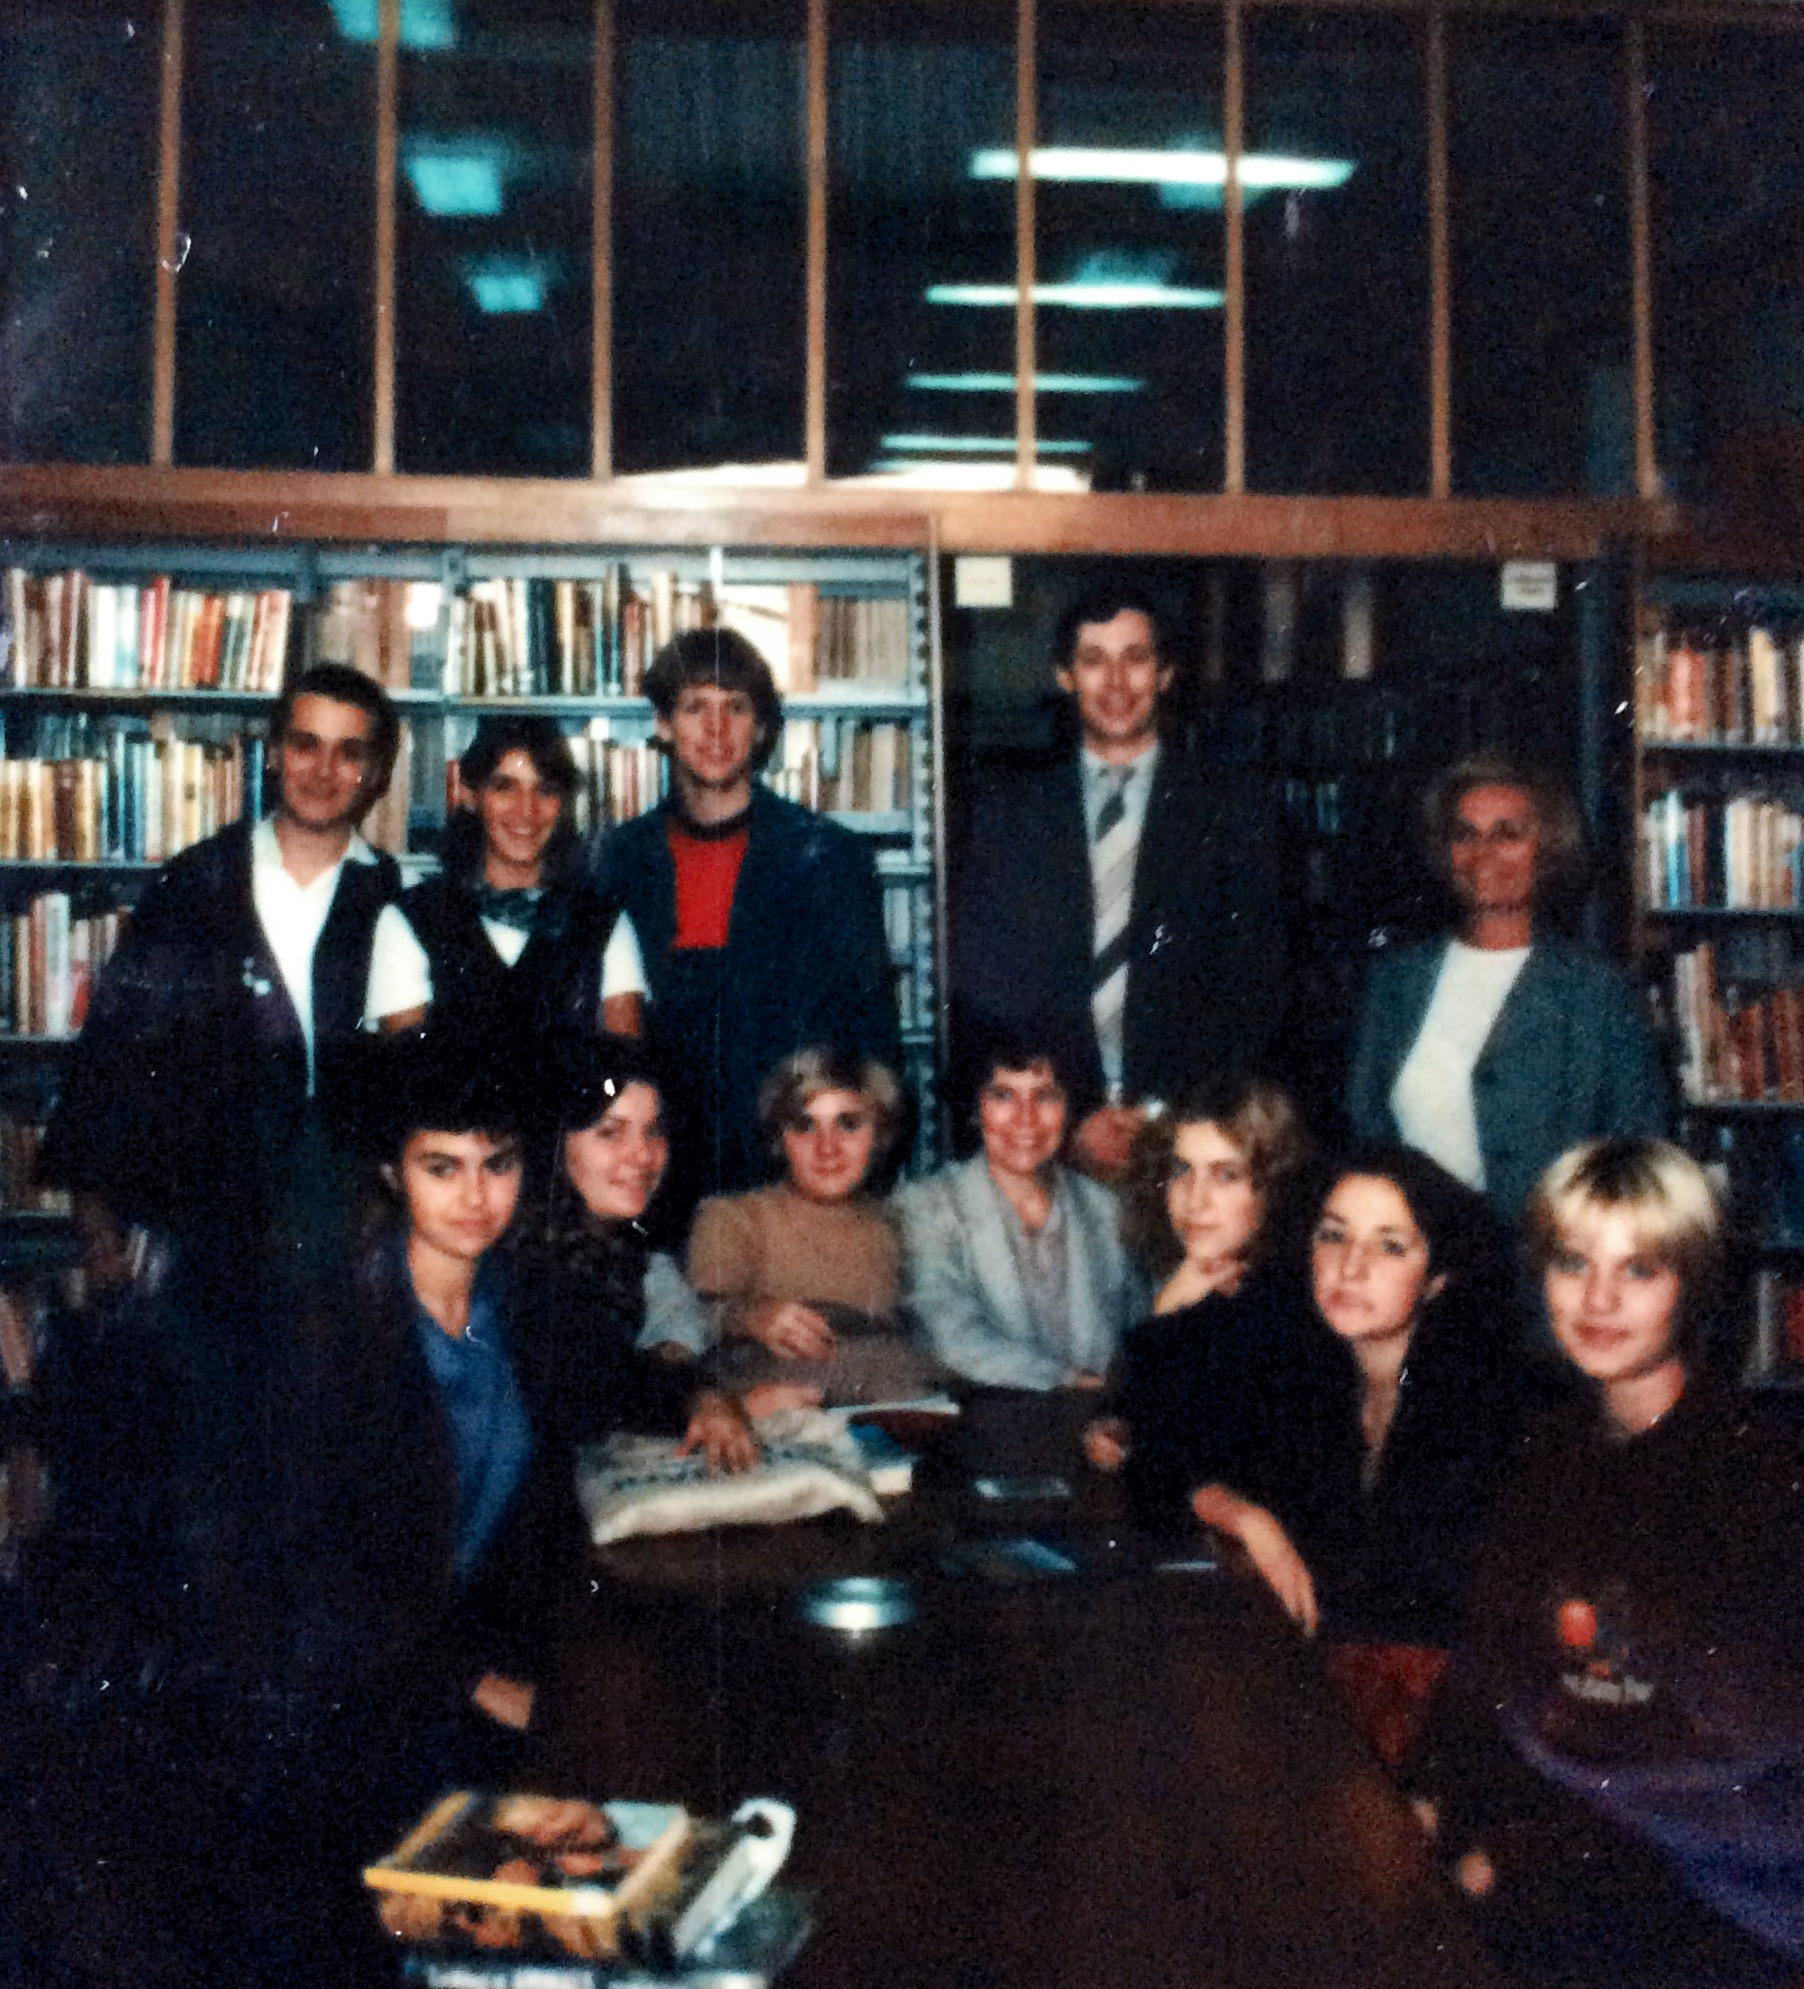 The staff of the British Council Library in Belgrade in 1980. The Librarian was Vera Rakic and her sister is in this photo on my immediate left.